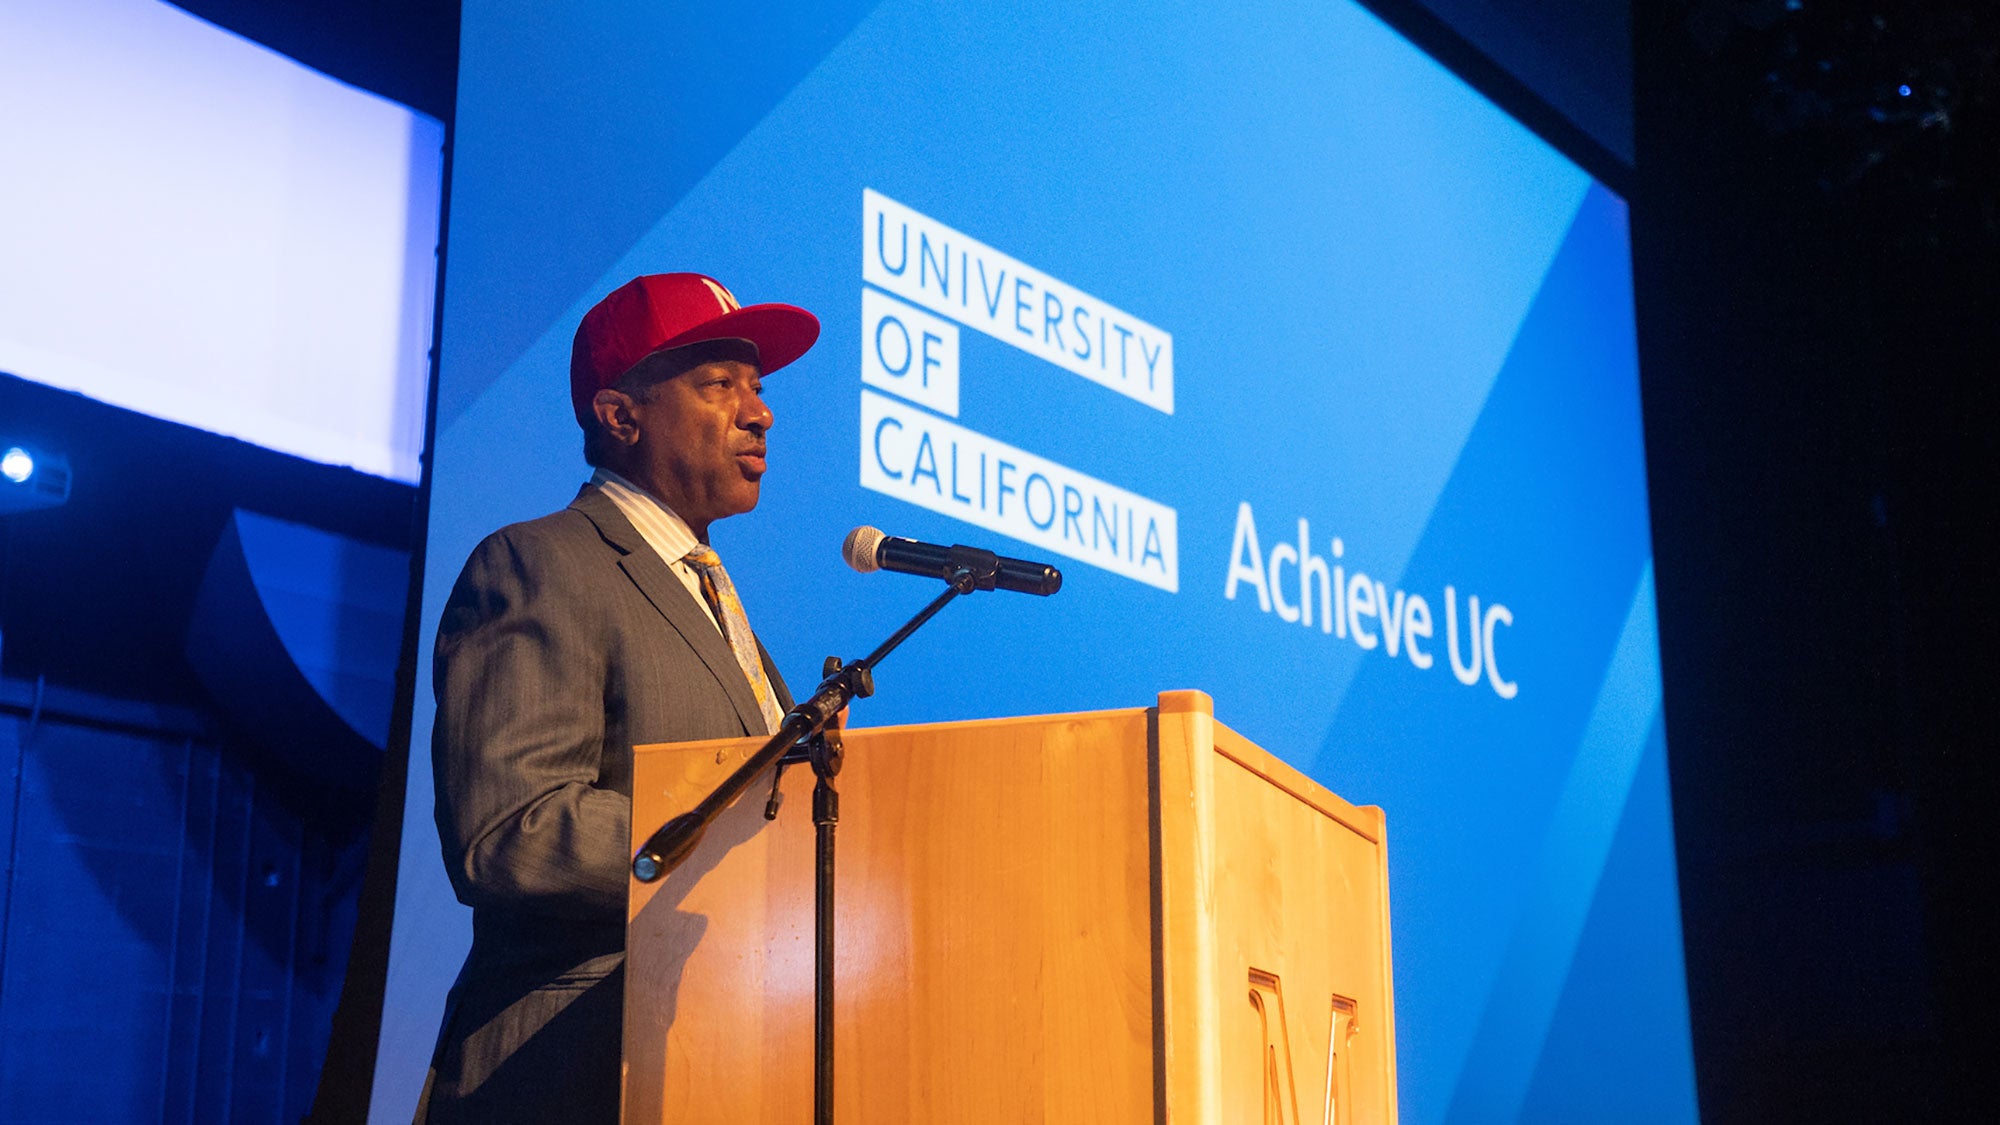 Chancellor Gary S. May wearing a baseball cap and standing on stage at a lectern